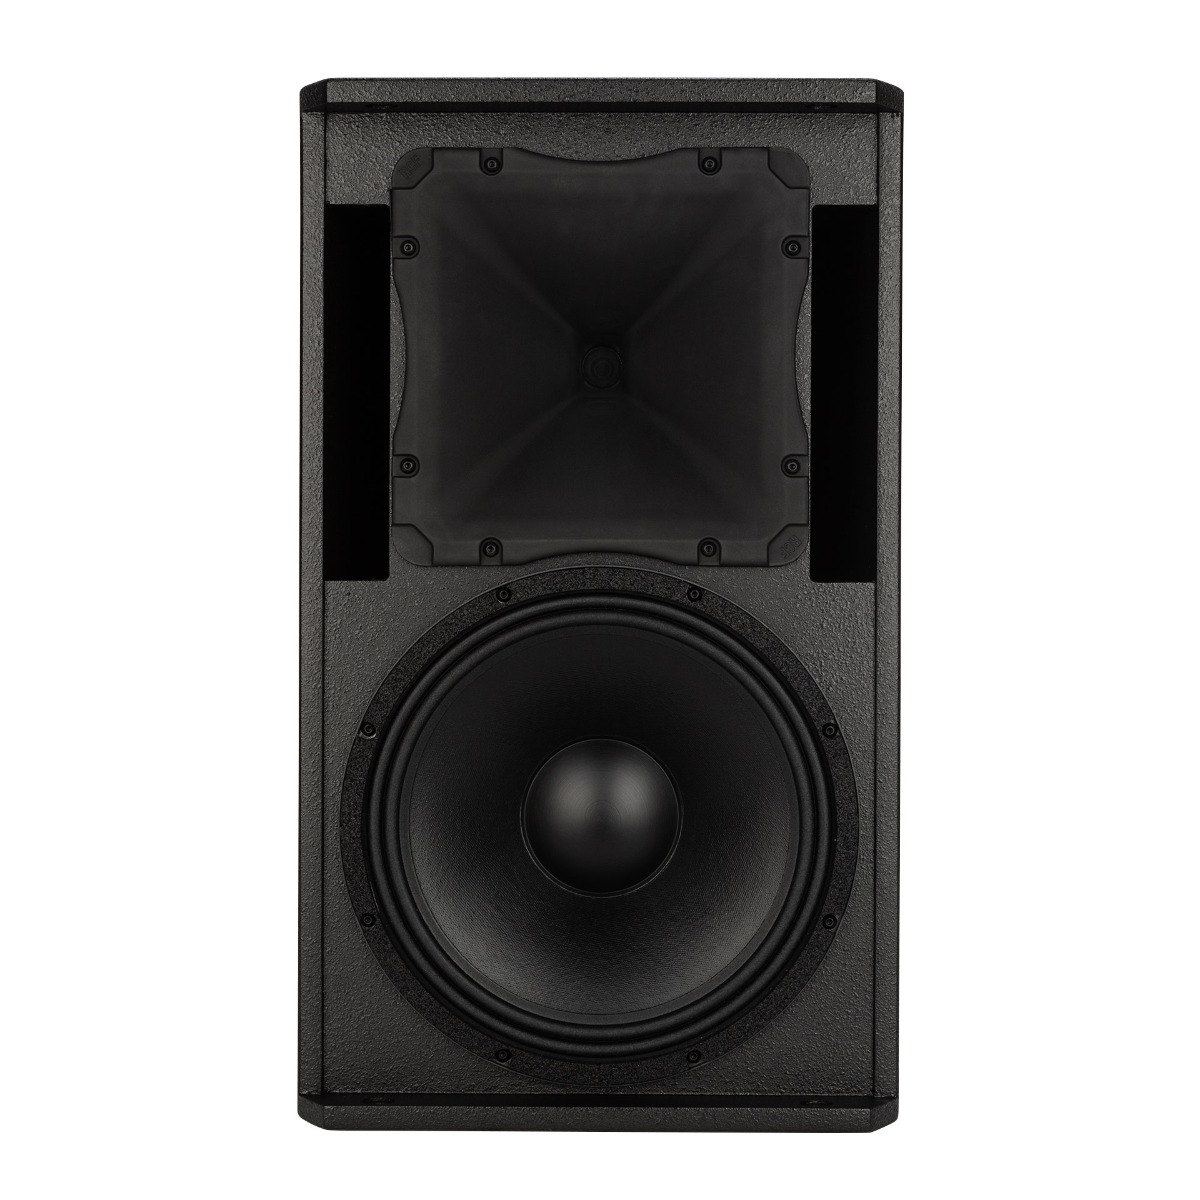 RCF COMPACT M 12 - 12" 2-Way Passive Installation Speaker